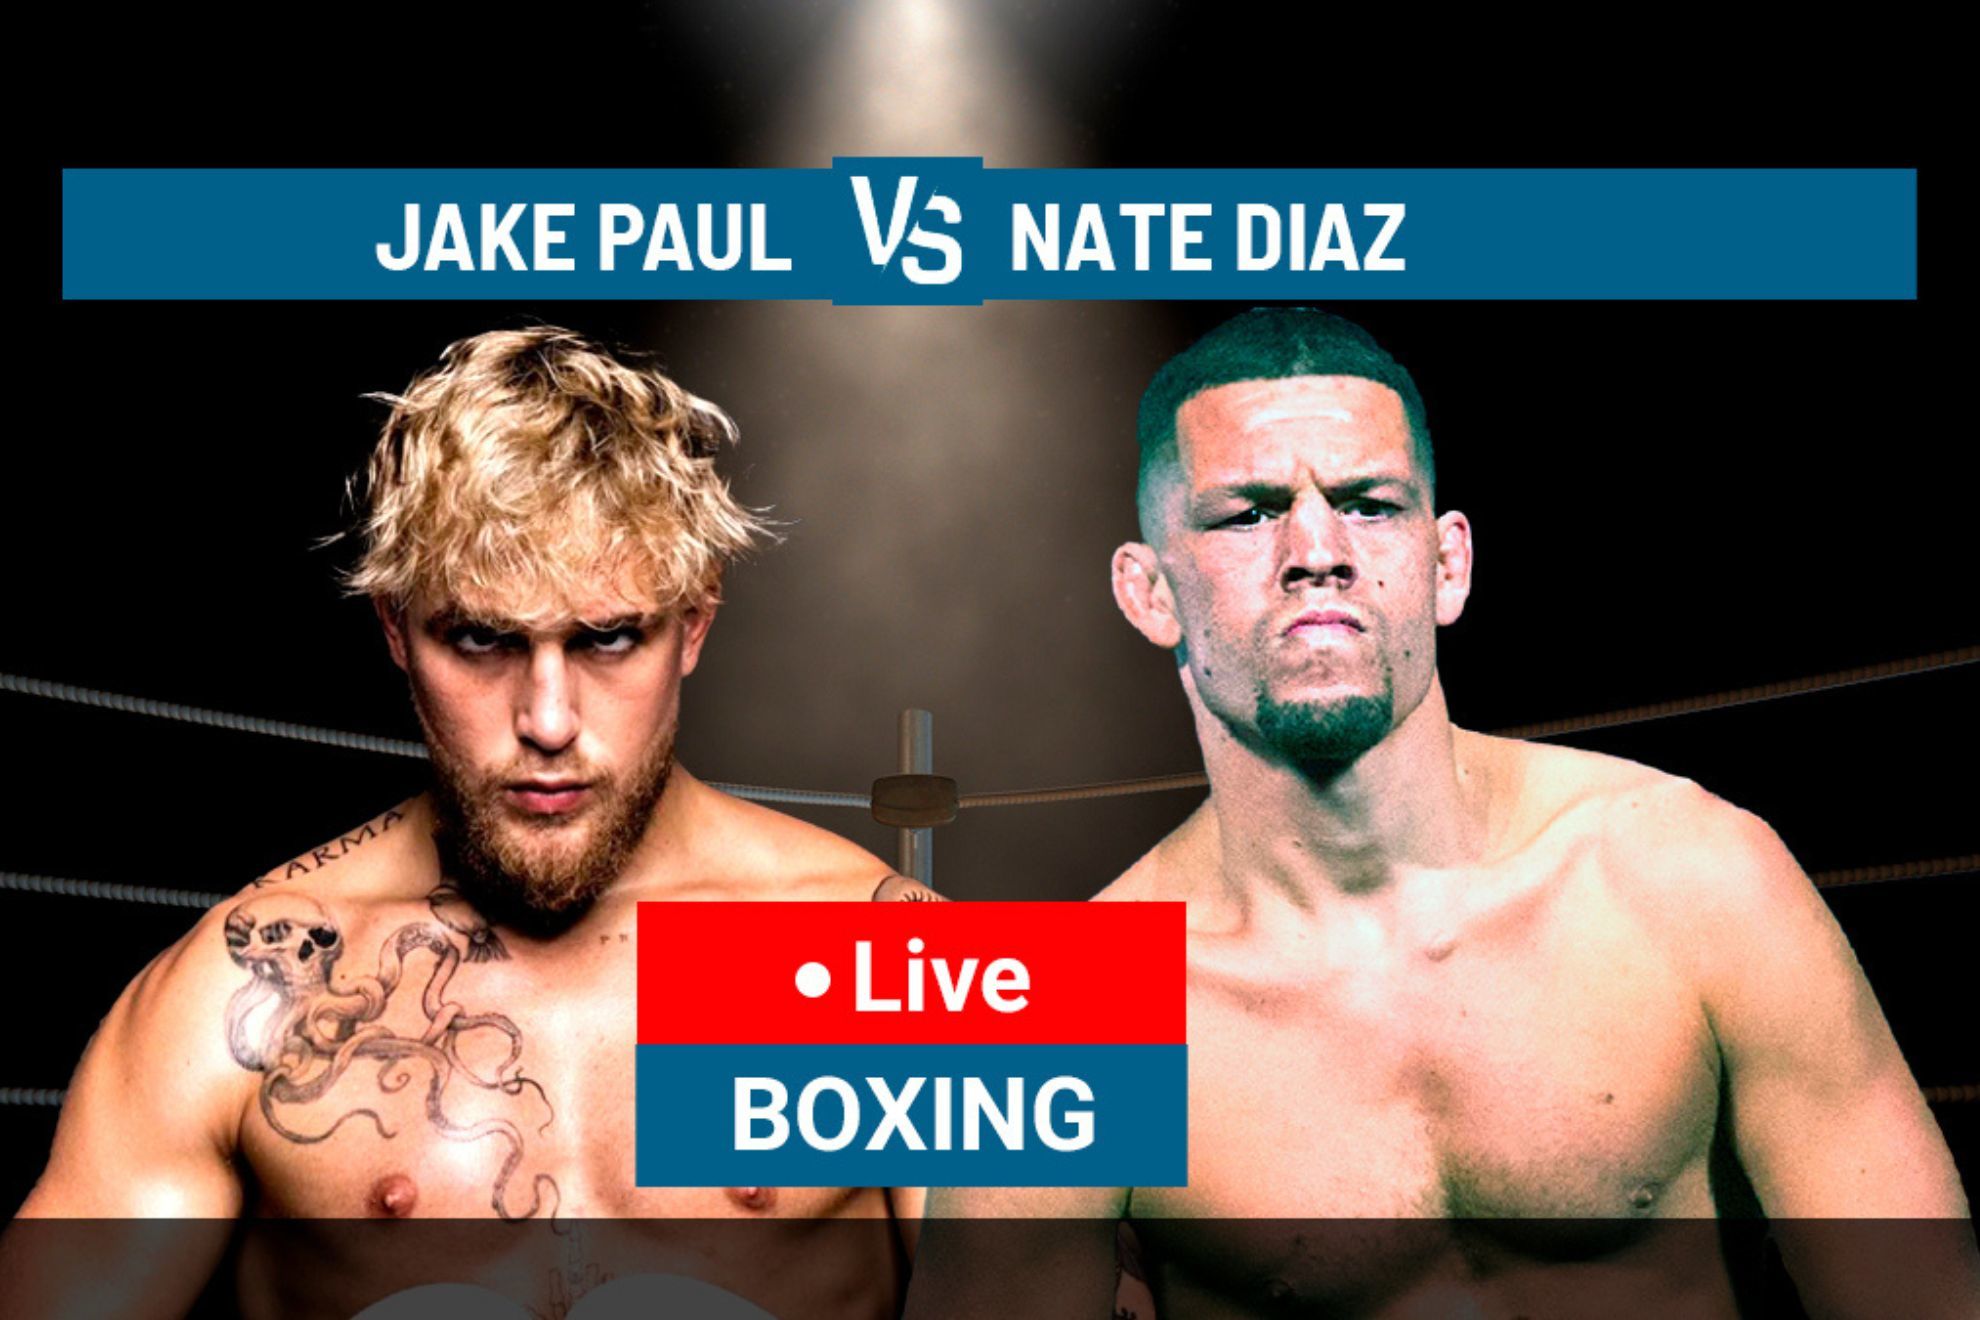 Jake Paul takes on Nate Diaz in a boxing match